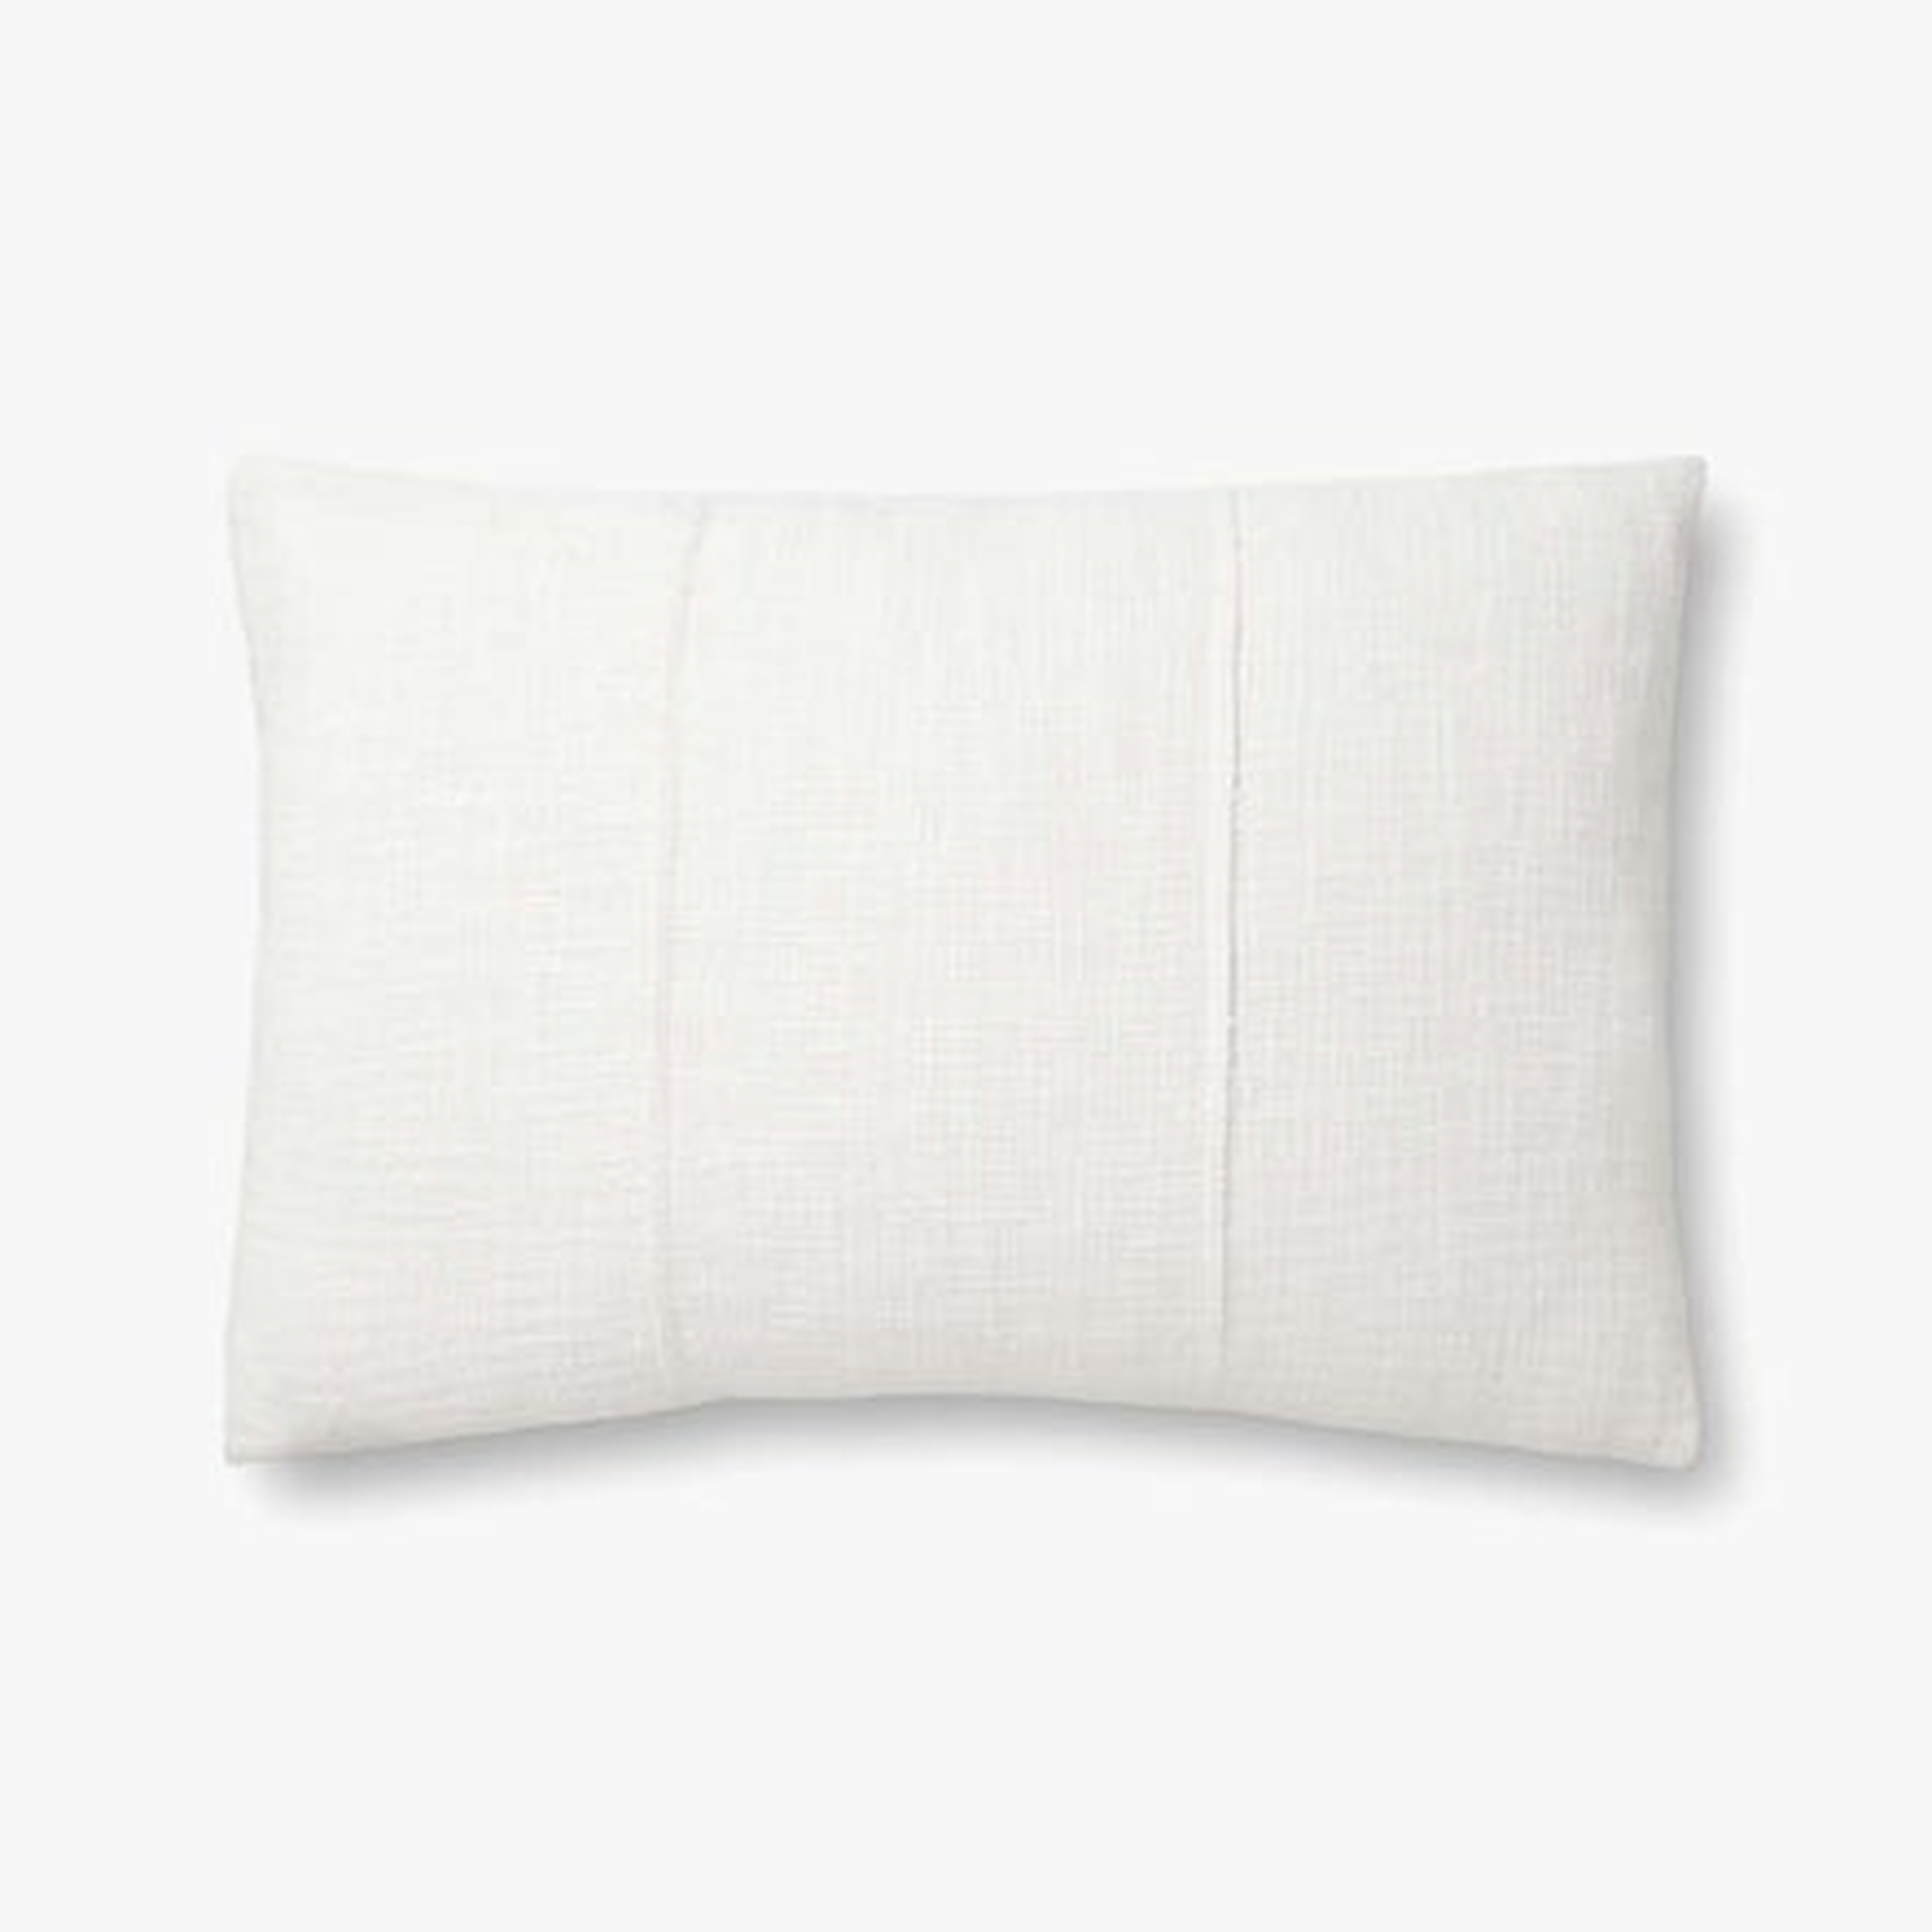 Magnolia Home by Joanna Gaines x Loloi Pillows PMH0013 White 16" x 26" Cover w/Down - Loloi Rugs